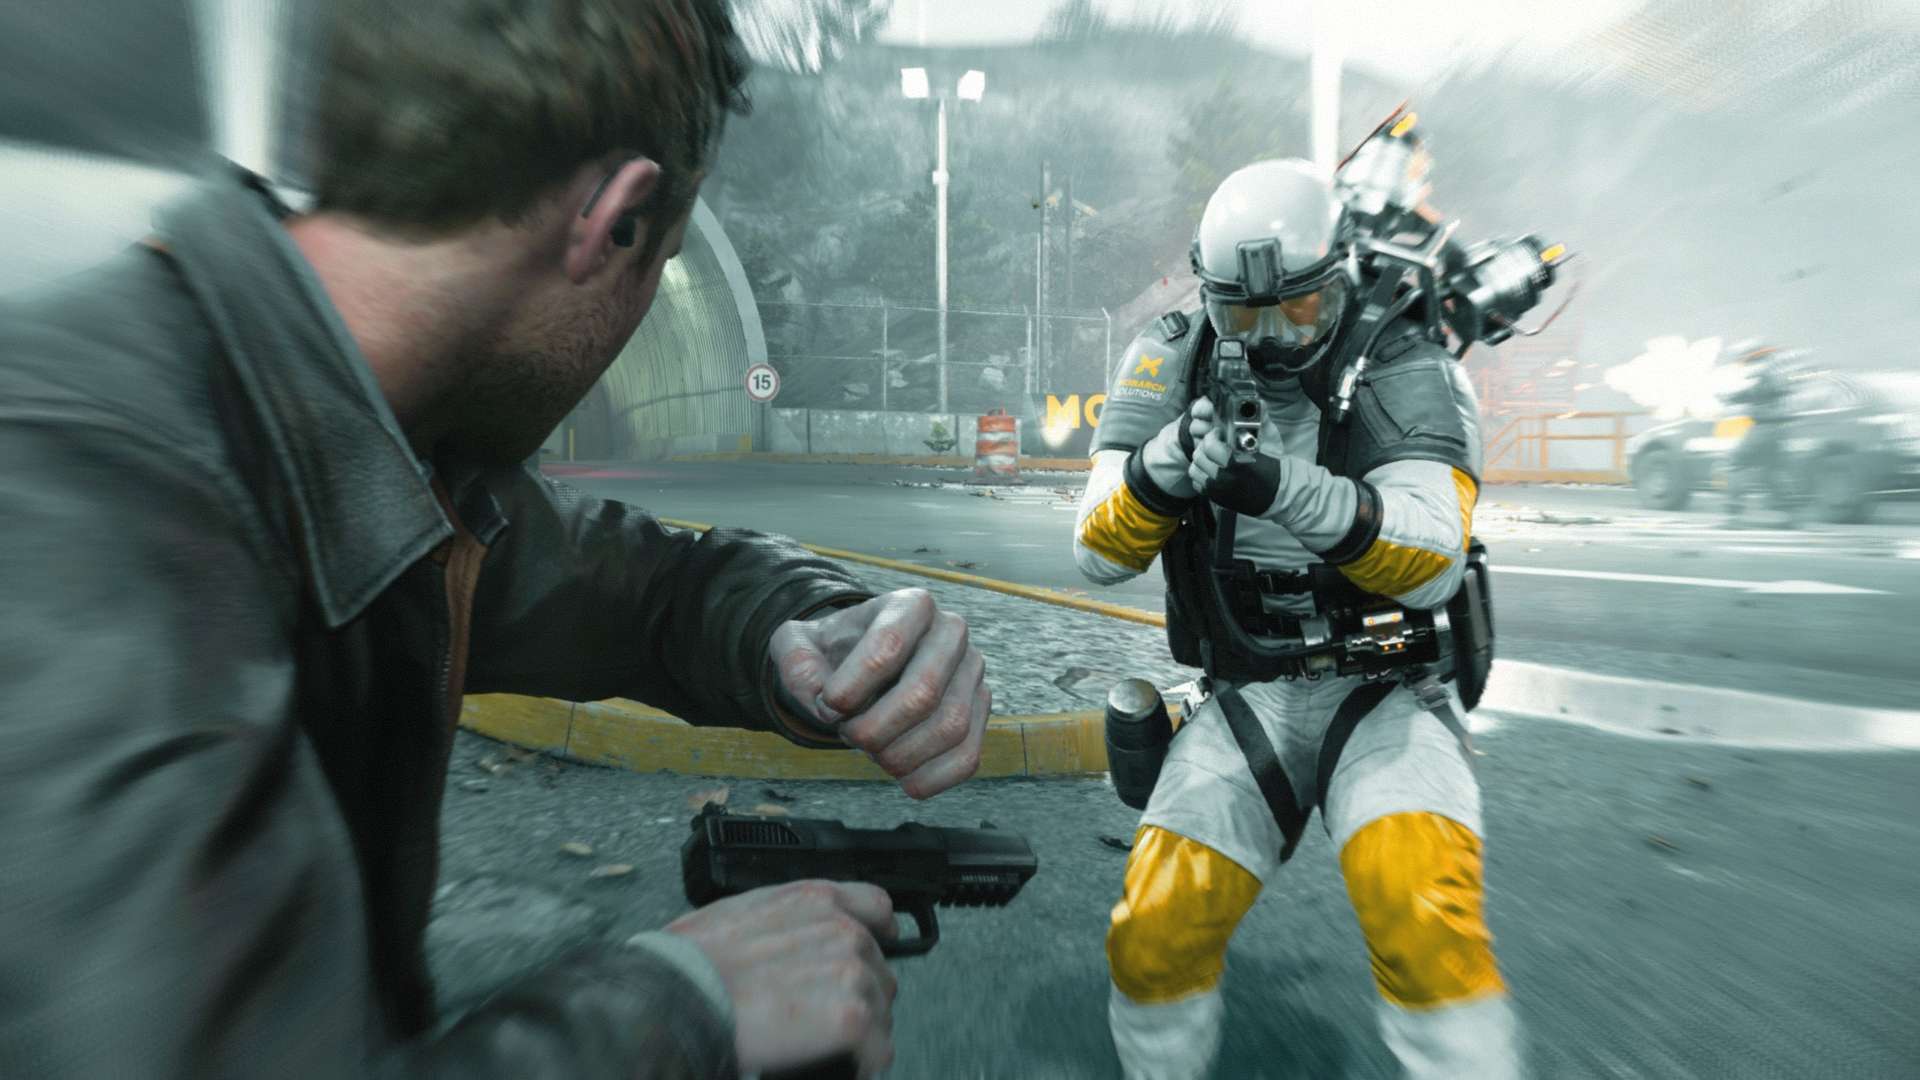 quantum break pc to use this you need to upgrade windows